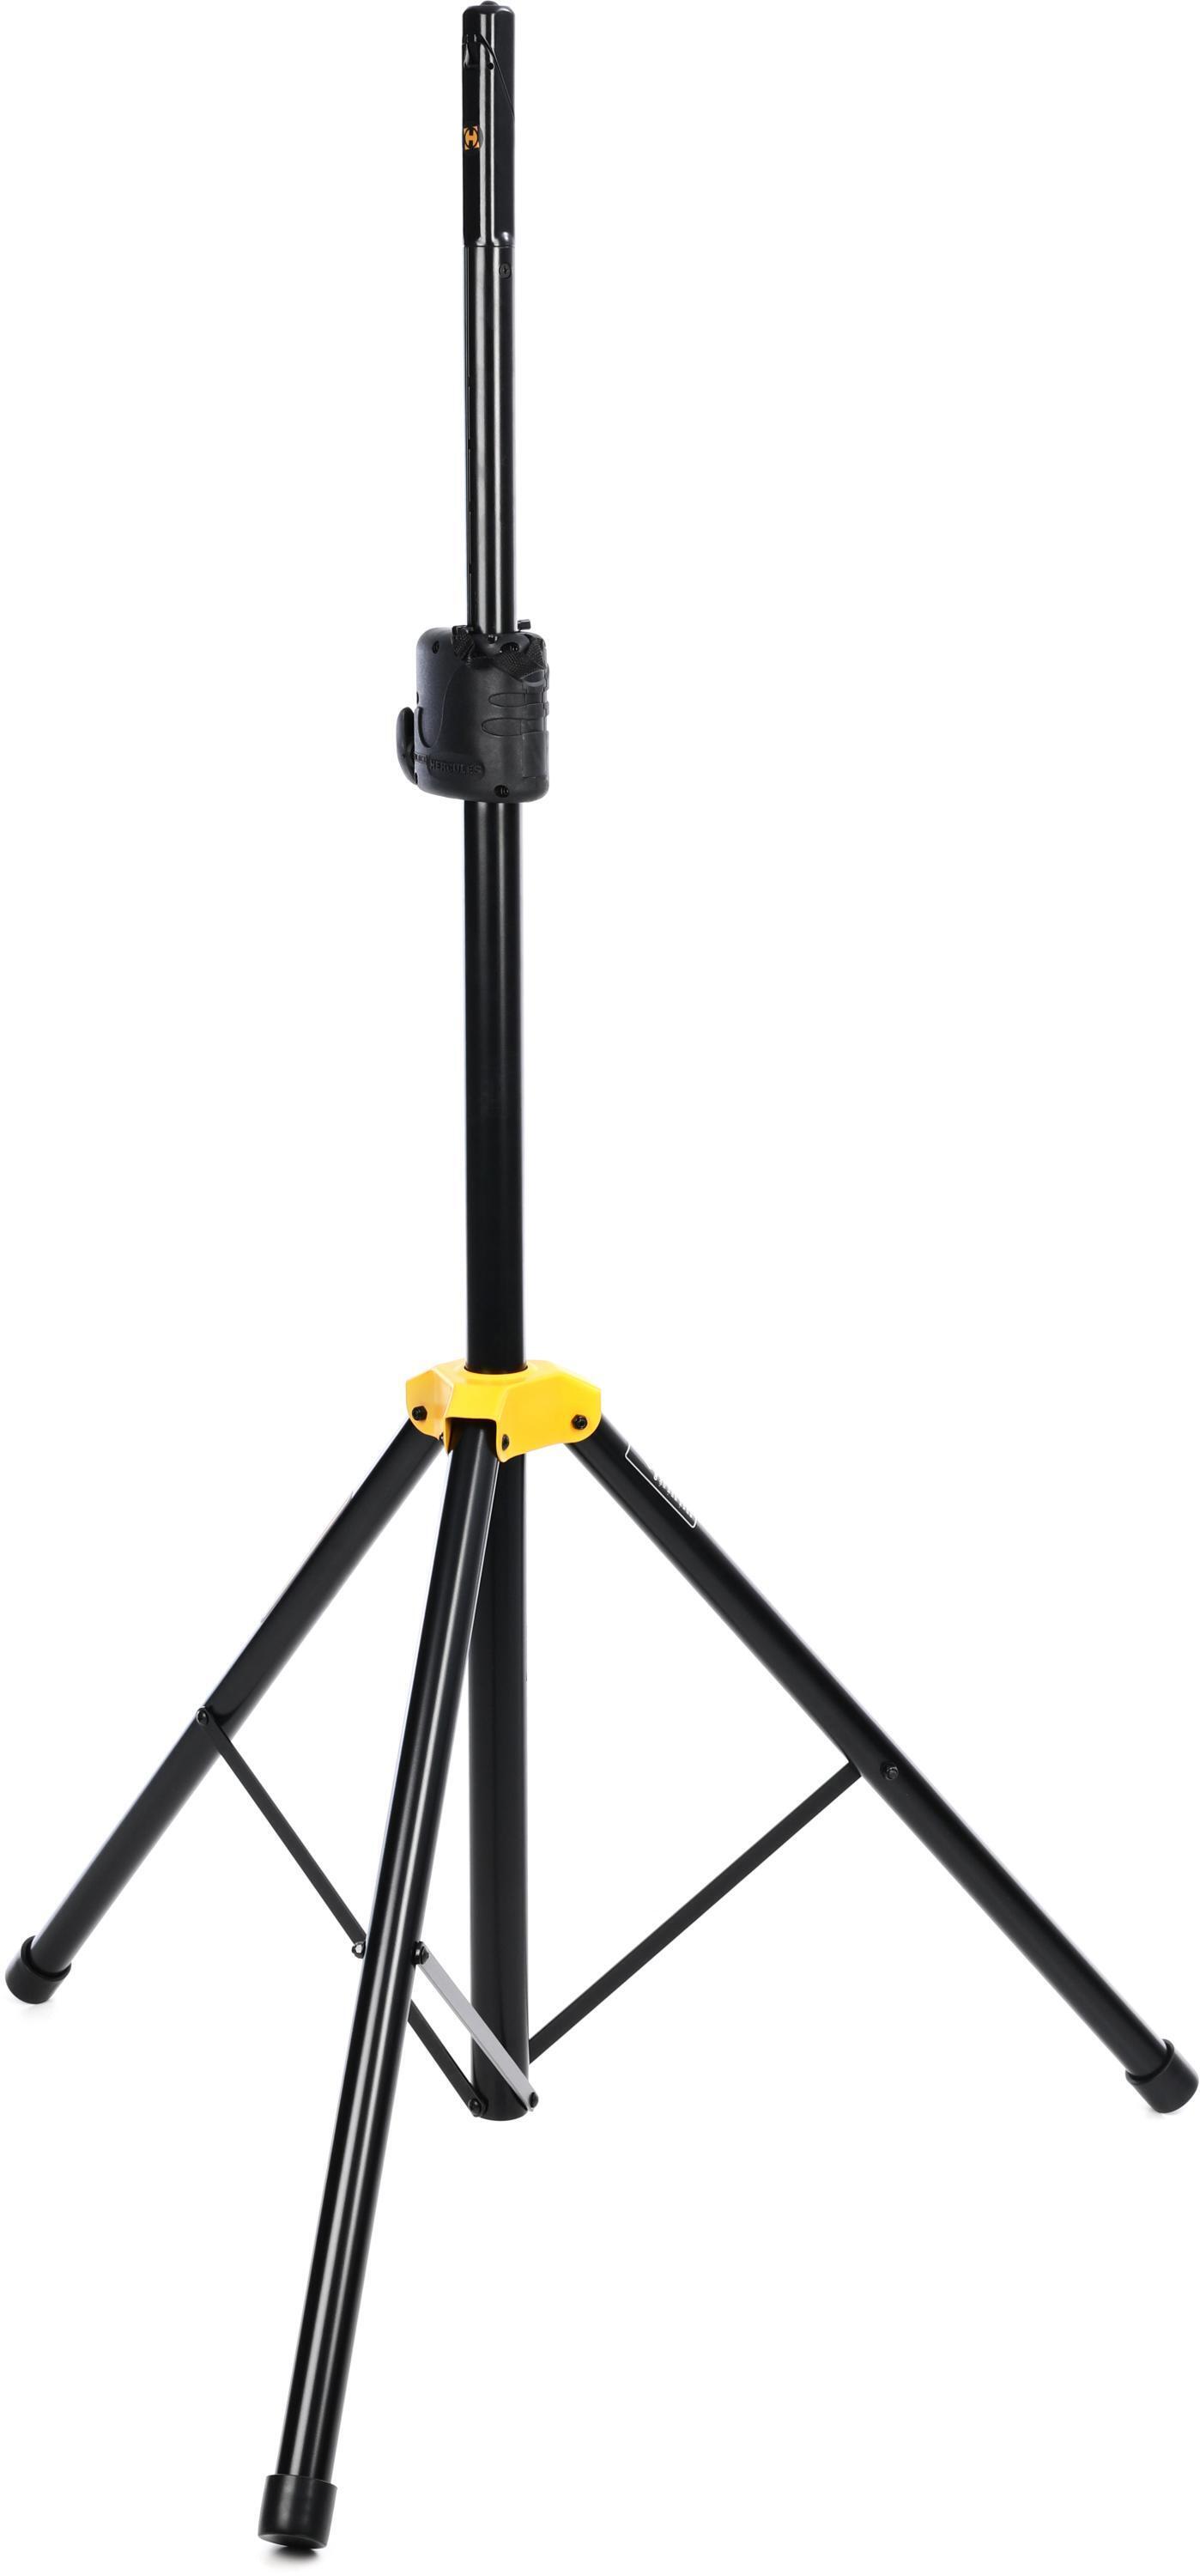 Bundled Item: Hercules Stands SS410B Autolock Speaker Stand with EZ Adapter